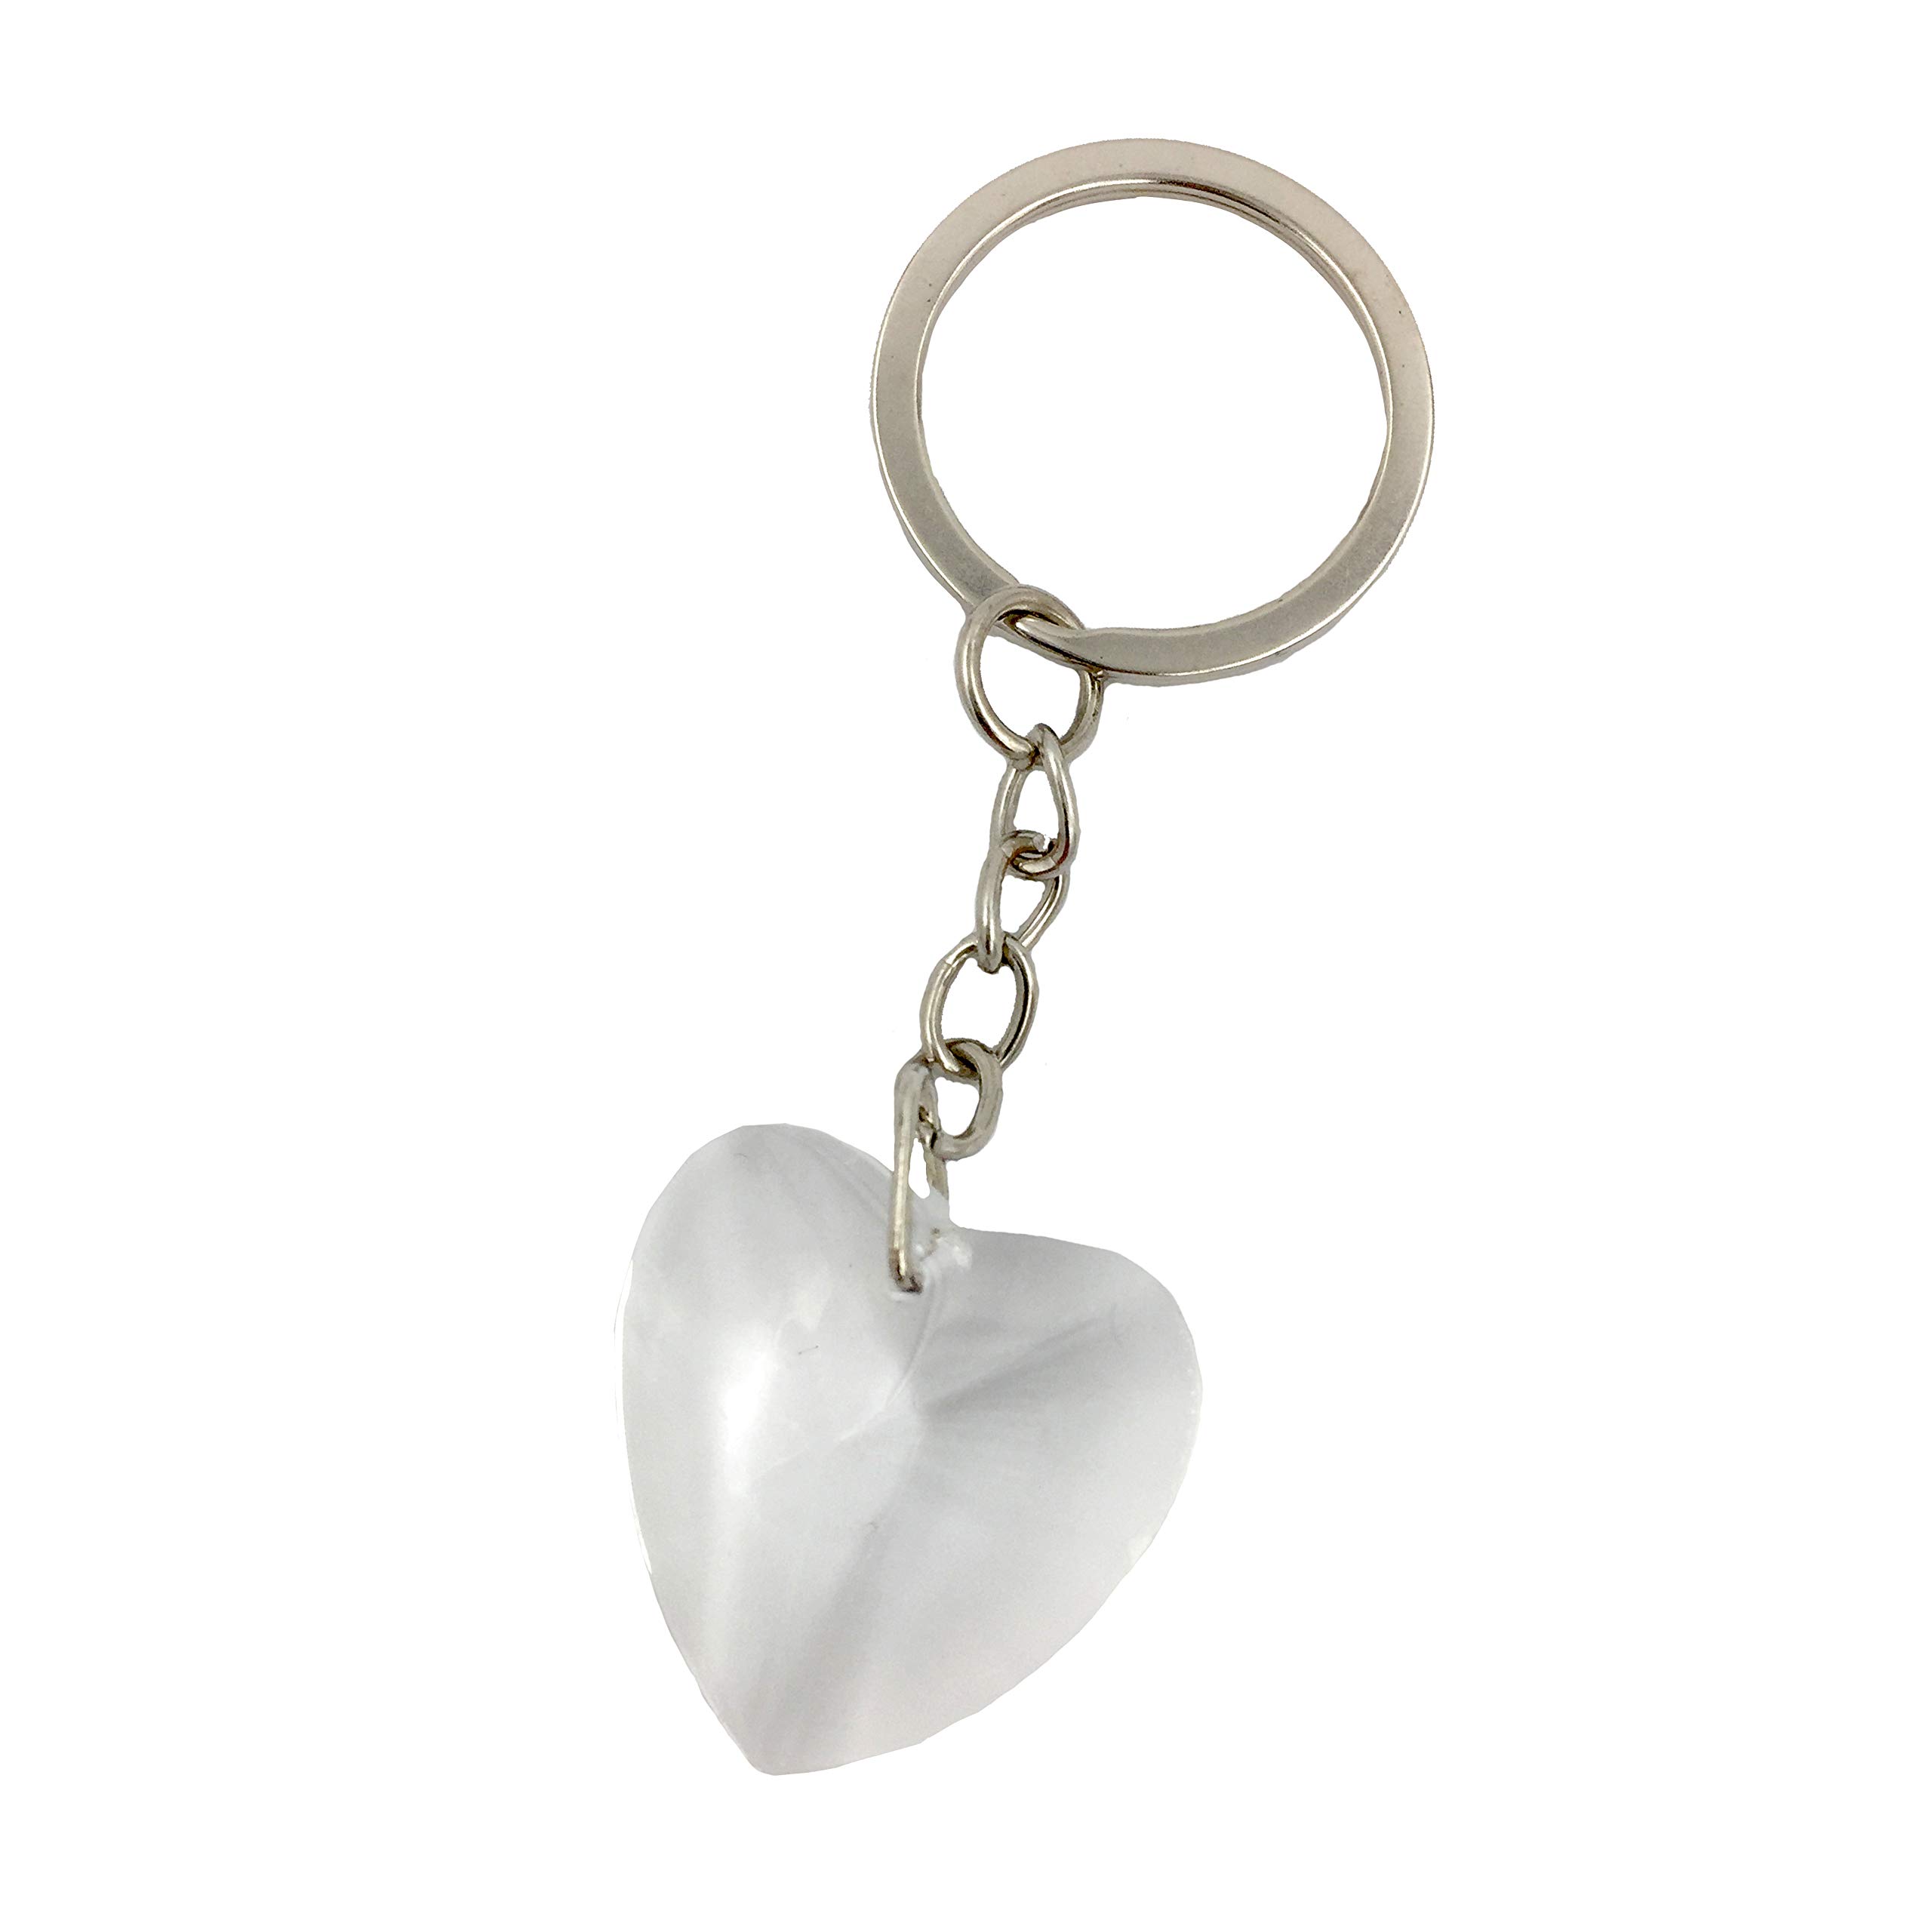 FASHIONCRAFT 2213 Chrome Keychain with Crystal Heart Wedding Favors, Bridal Shower Favors, Pack of 60